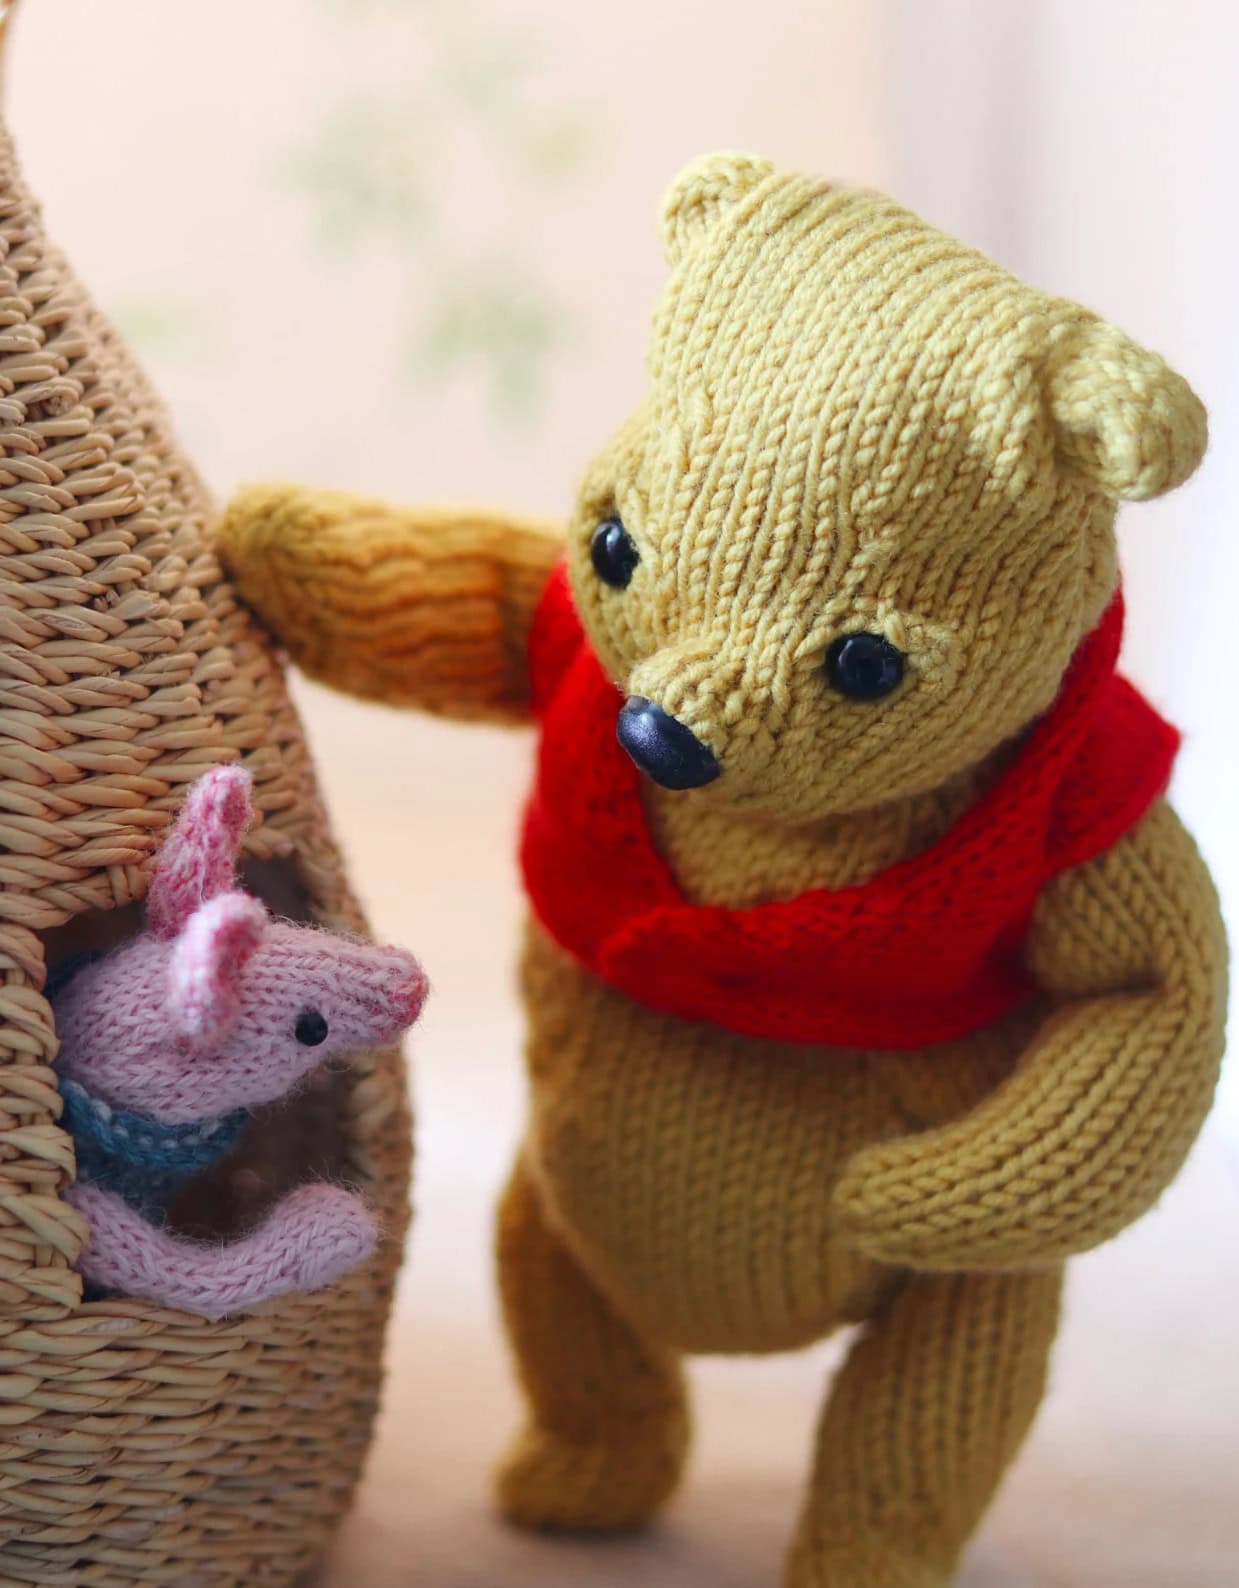 winnie the pooh knitting pattern Honey Bear inspired by Pooh Bear himself from the A A Milne books with illustrations by E H Shepard. It's by Claire Garland aka Dot Pebbles Knits and just one of her gorgeous collection that includes Piglet and Eeyore too! Read my blog post to get all the info you need, see beautiful images and a cute little video - as well as get your PDF digital download pattern and start knitting today!